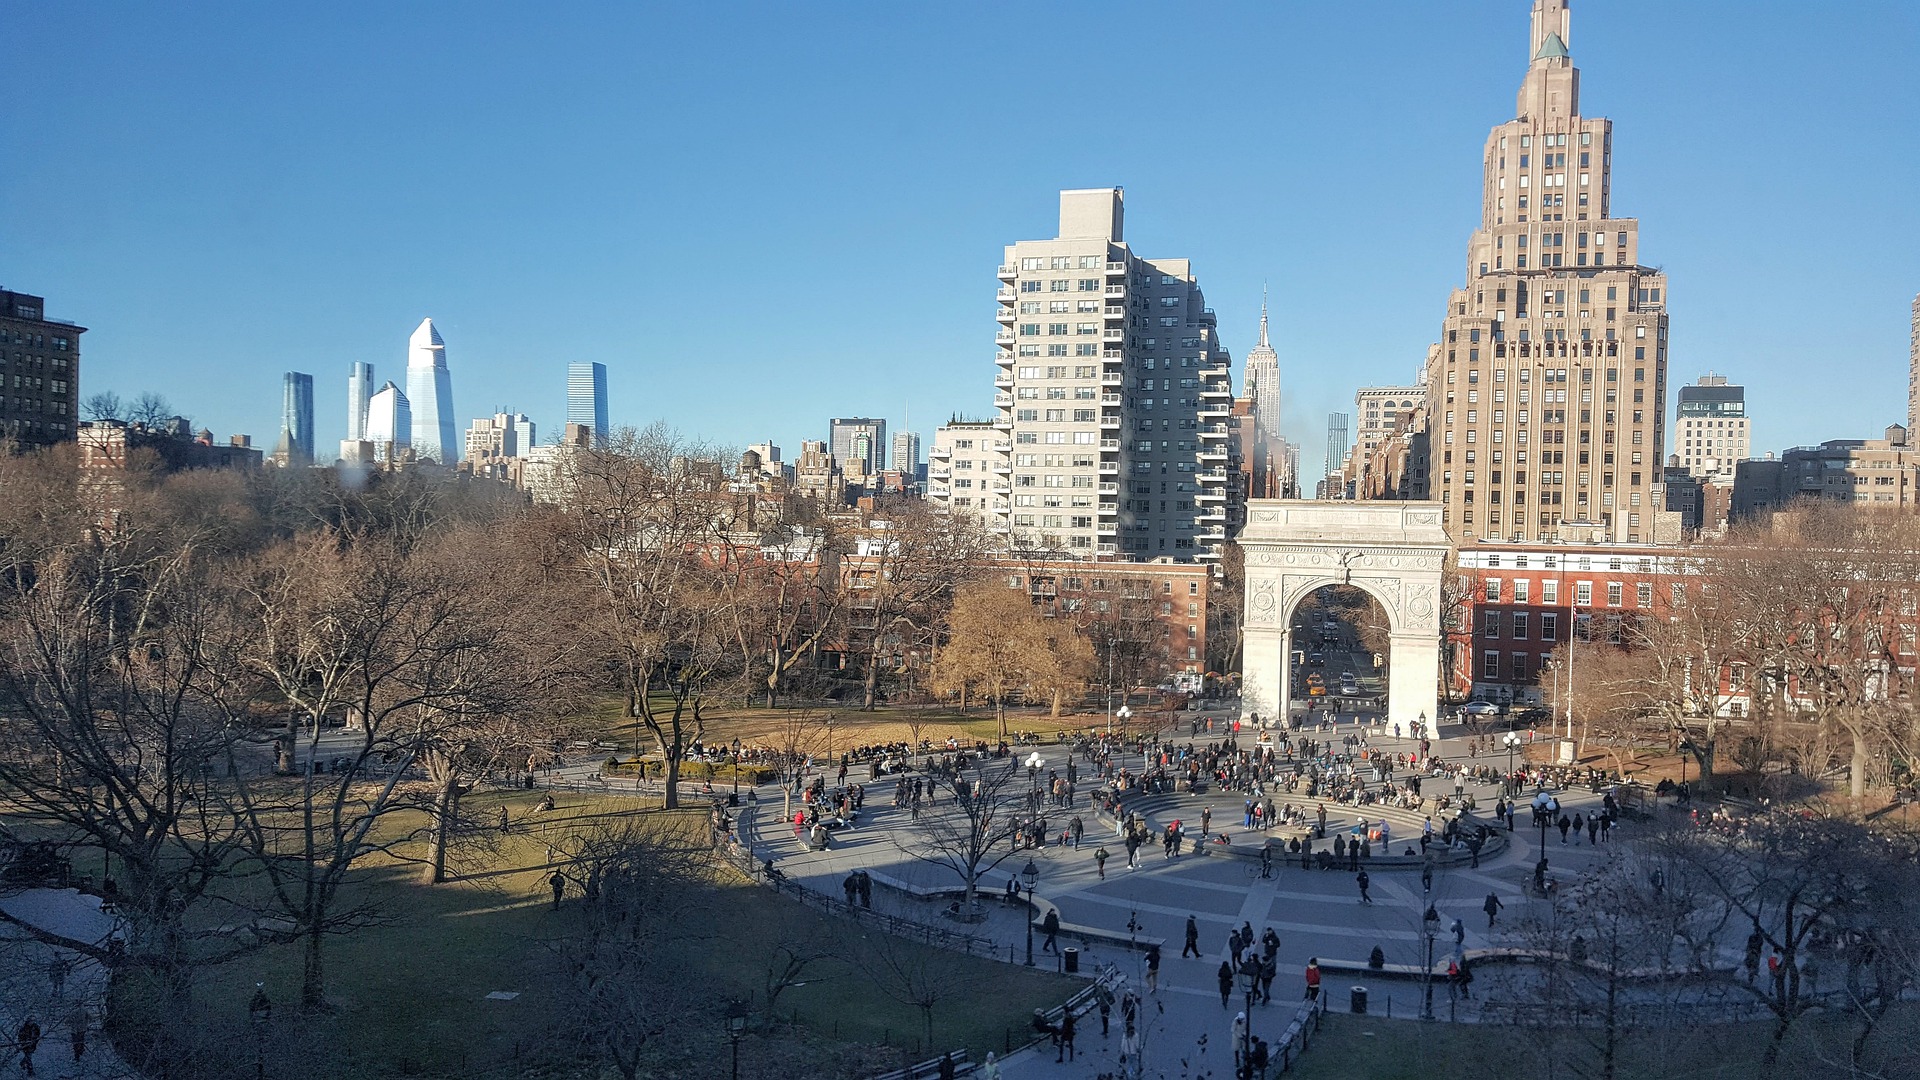 Washington Square Park in daytime, with sunlight shining directly on the Arch